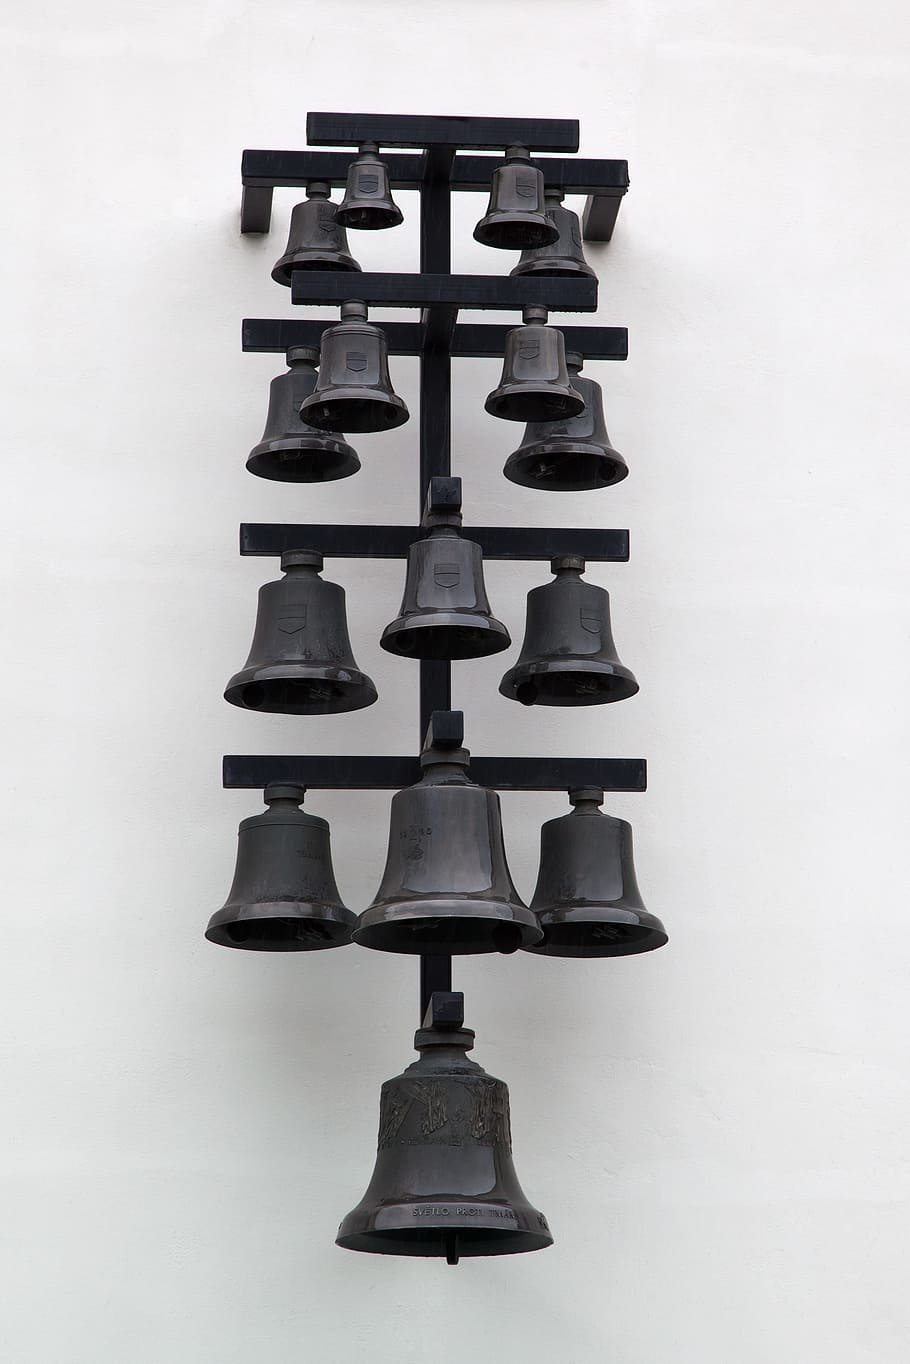 Attraction, Bell, Bells, Carillon, device, instrument, iron, many, metal, music